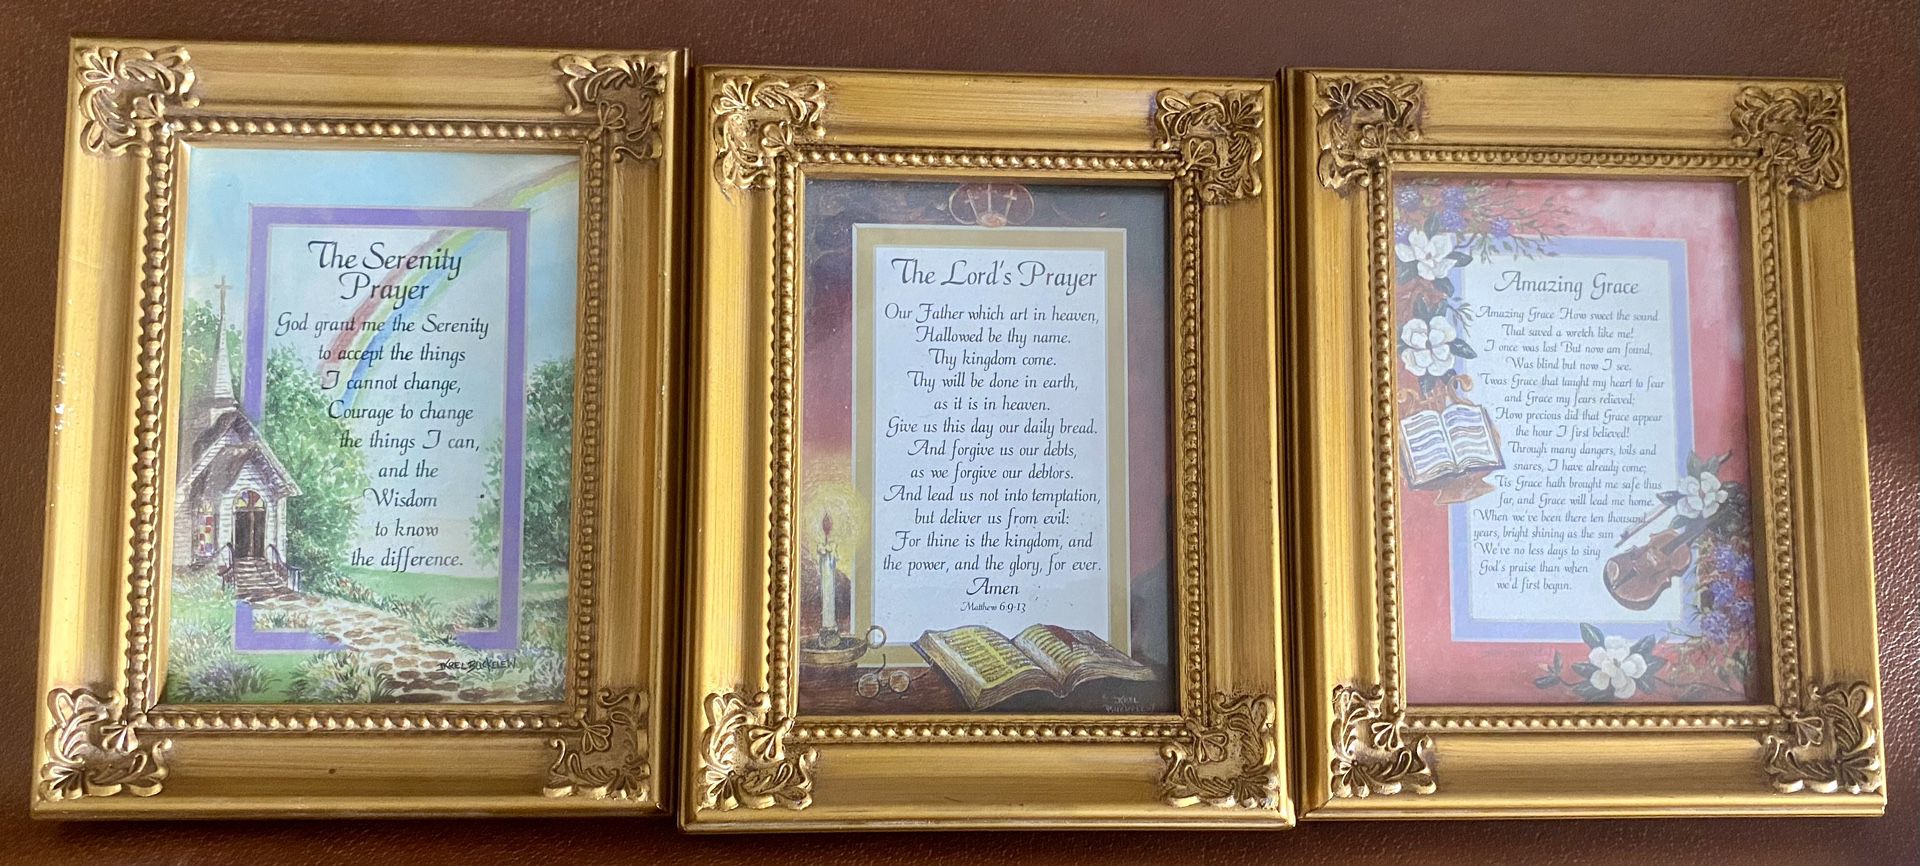 3 Framed Religious Decorative Hanging Pictures